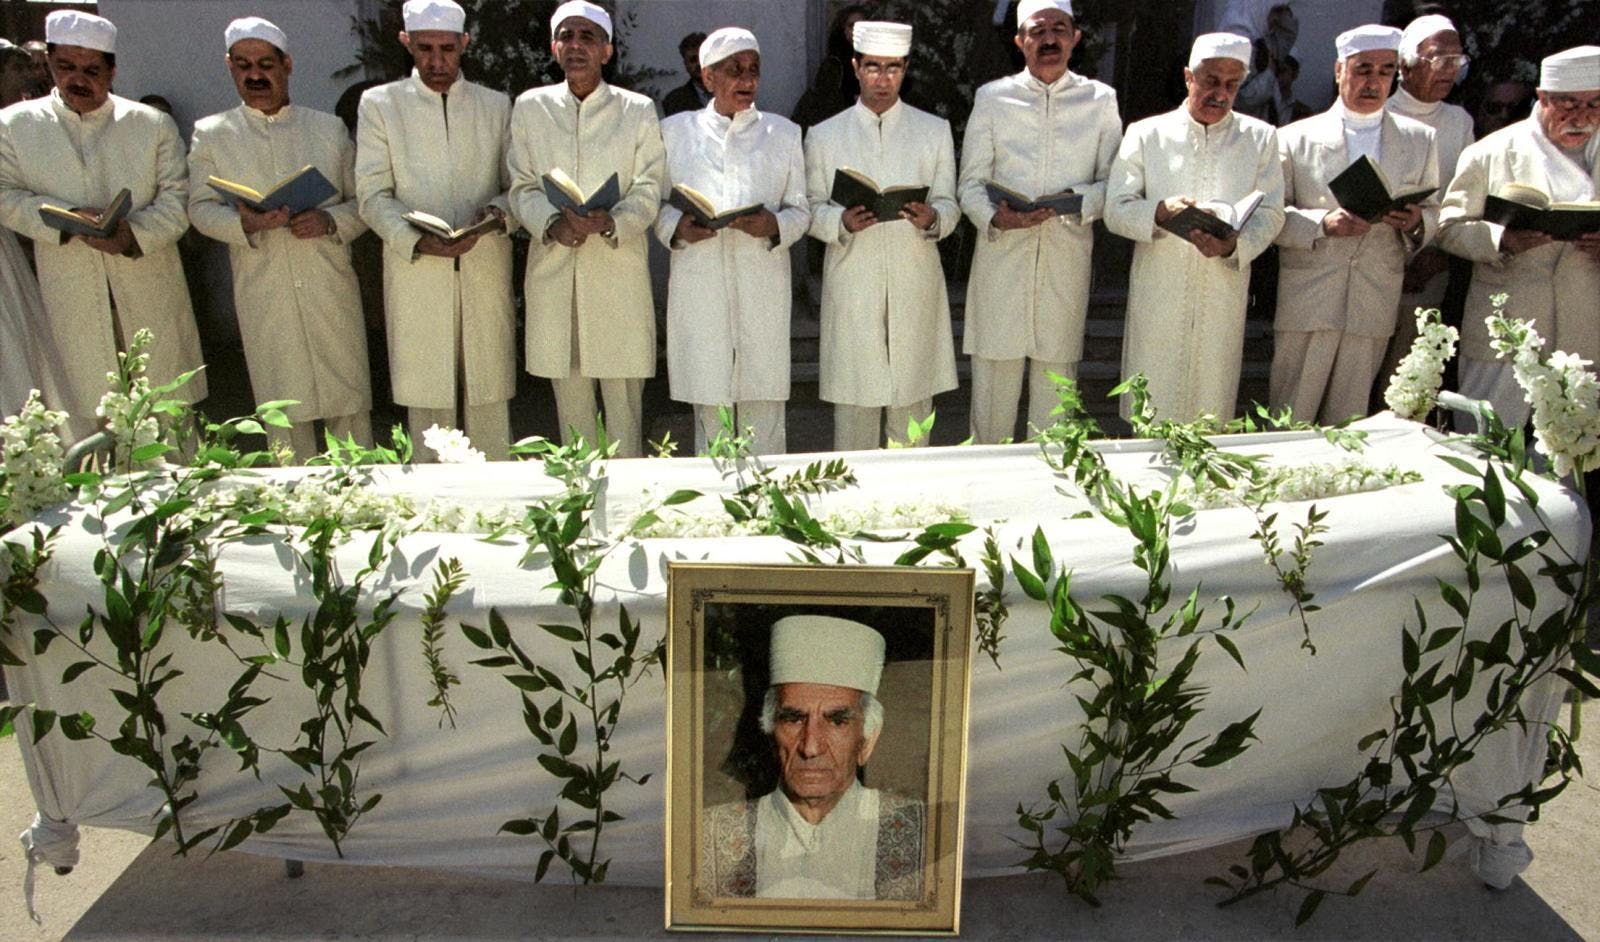 Zoroastrian priests pray for the religious leader of the Iranian Zoroastrian community Dastur Rostam Dinyar Shahzadi during his funeral in Tehran on March 15, 2000 at the Zoroastrian Qasr-e-Firoozeh cemetery.(HENGHAMEH FAHIMI/AFP via Getty Images)